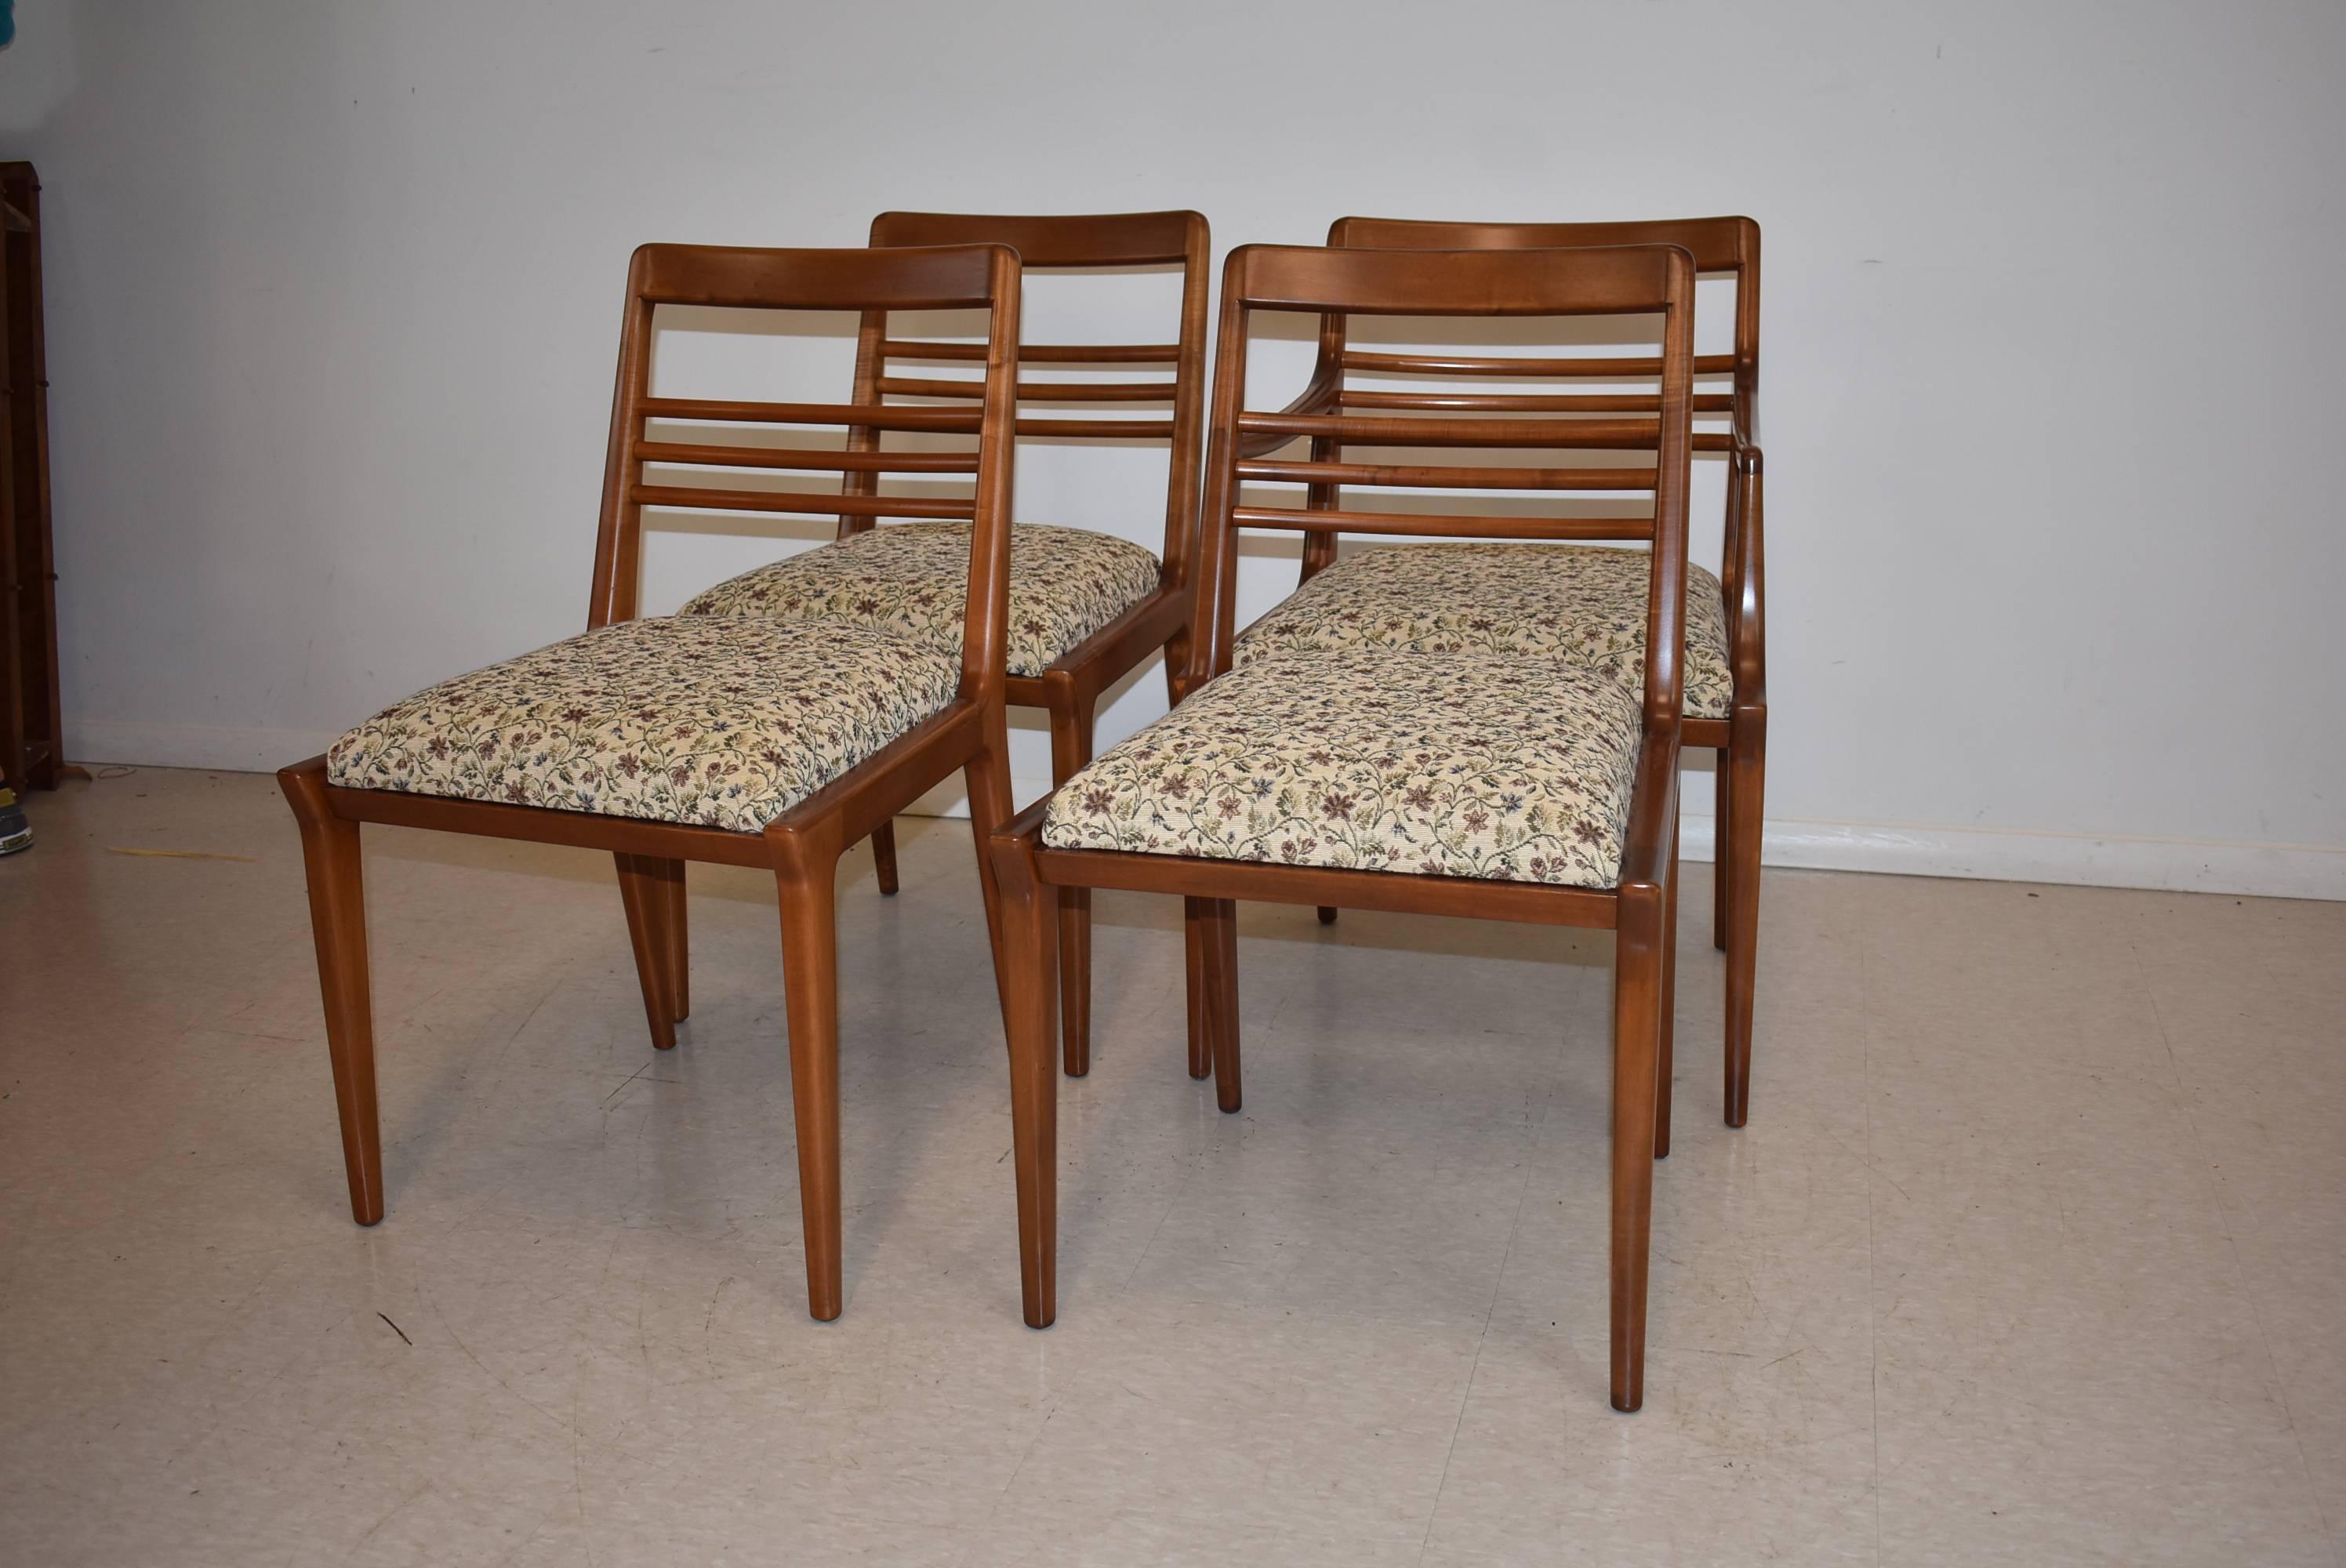 Cherry Mid-Century Modern Dining Room Table and Four Chairs, Johnson Furniture Company